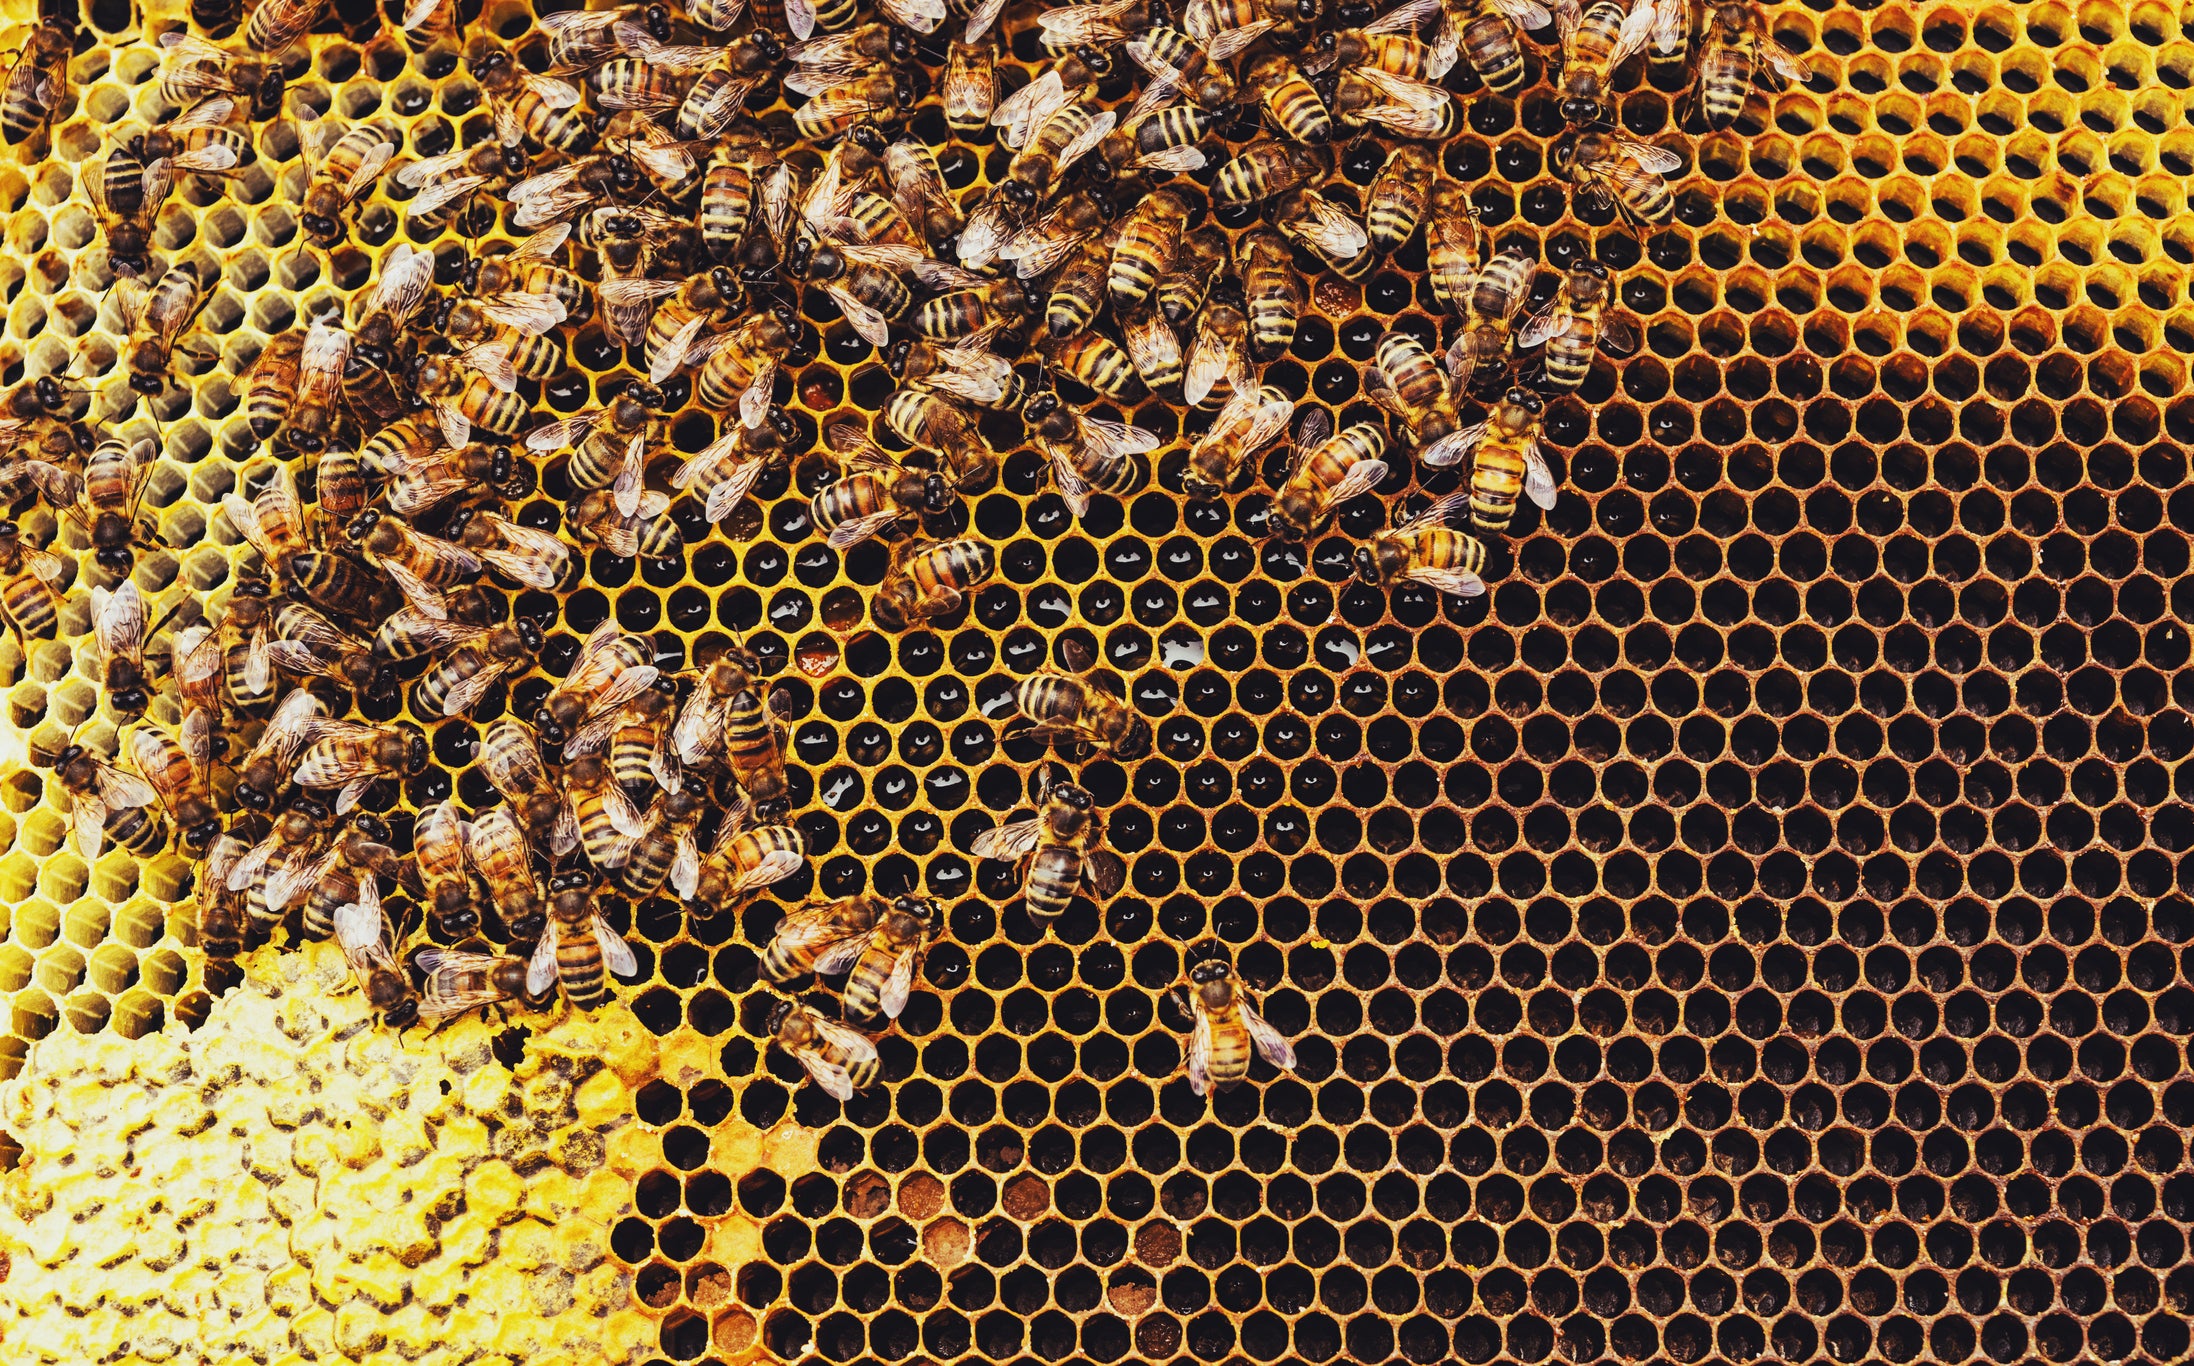 Honeybees are a social animal and benefit from dividing up responsibilities and interactions such as mutual grooming